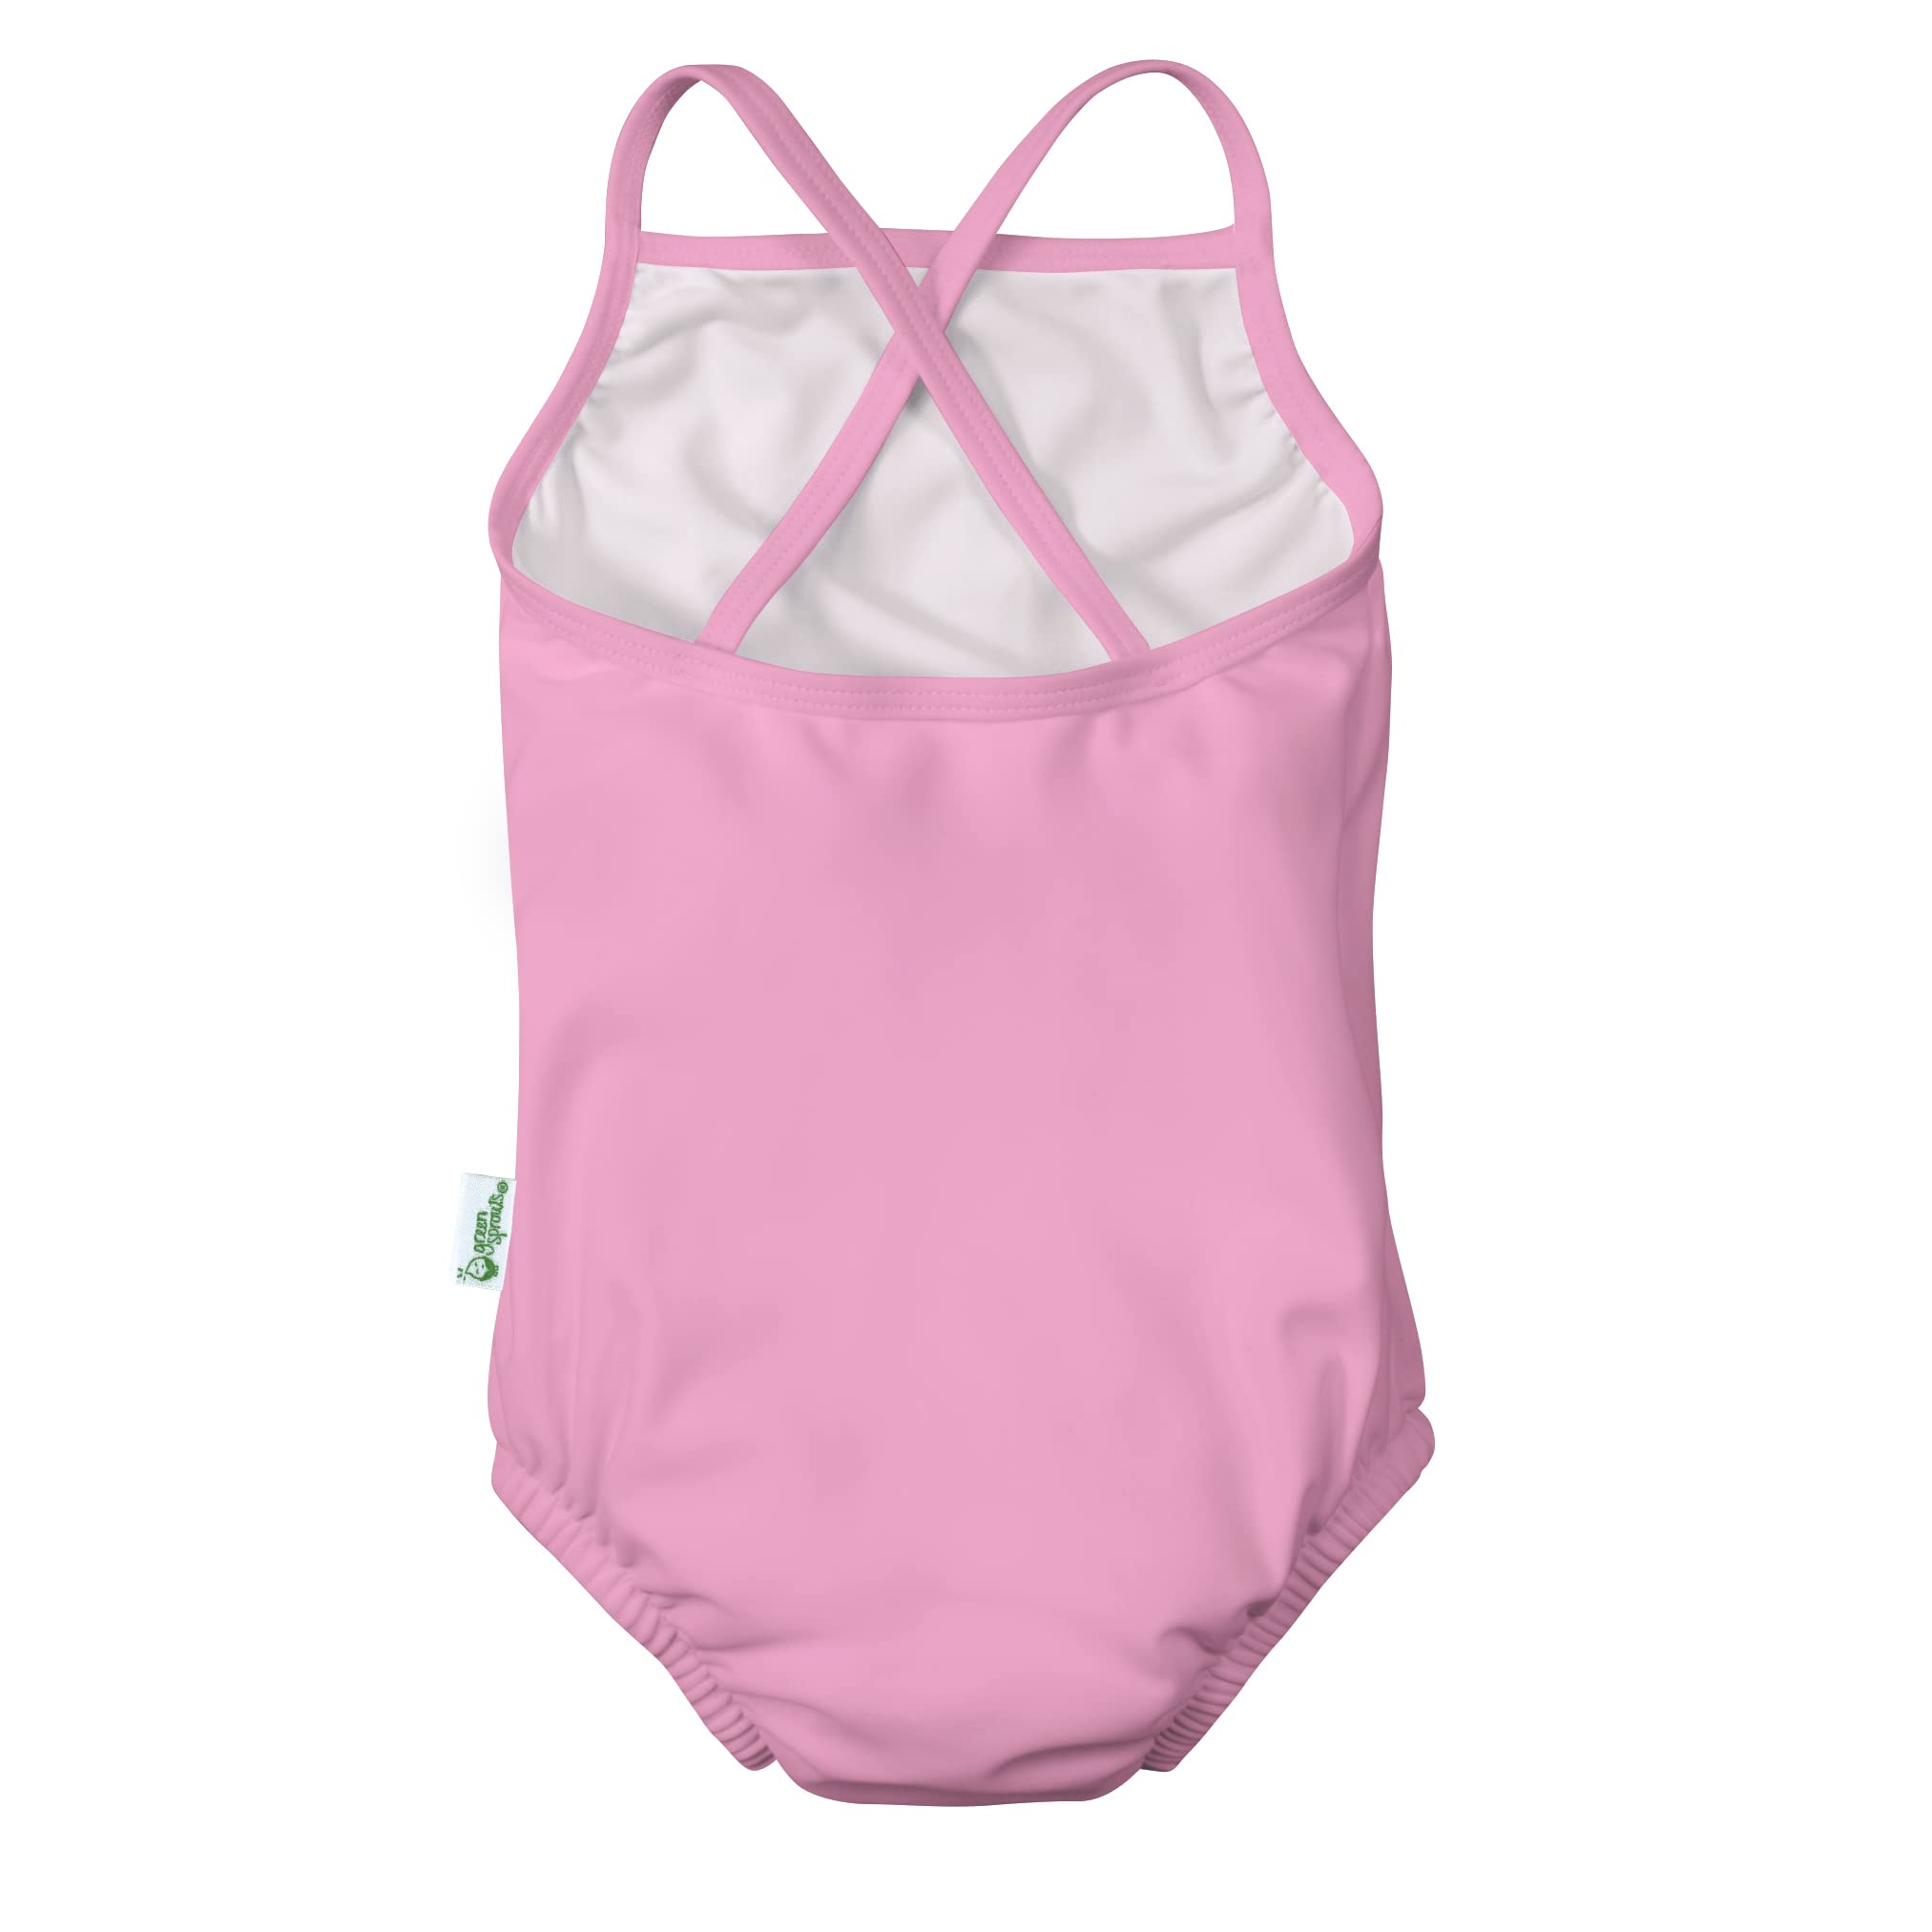 i play. by Green Sprouts One-Piece Swimsuit with Built in Reusable Swim Diaper | Helps Provide Secure Protection for Babies & Swimmers